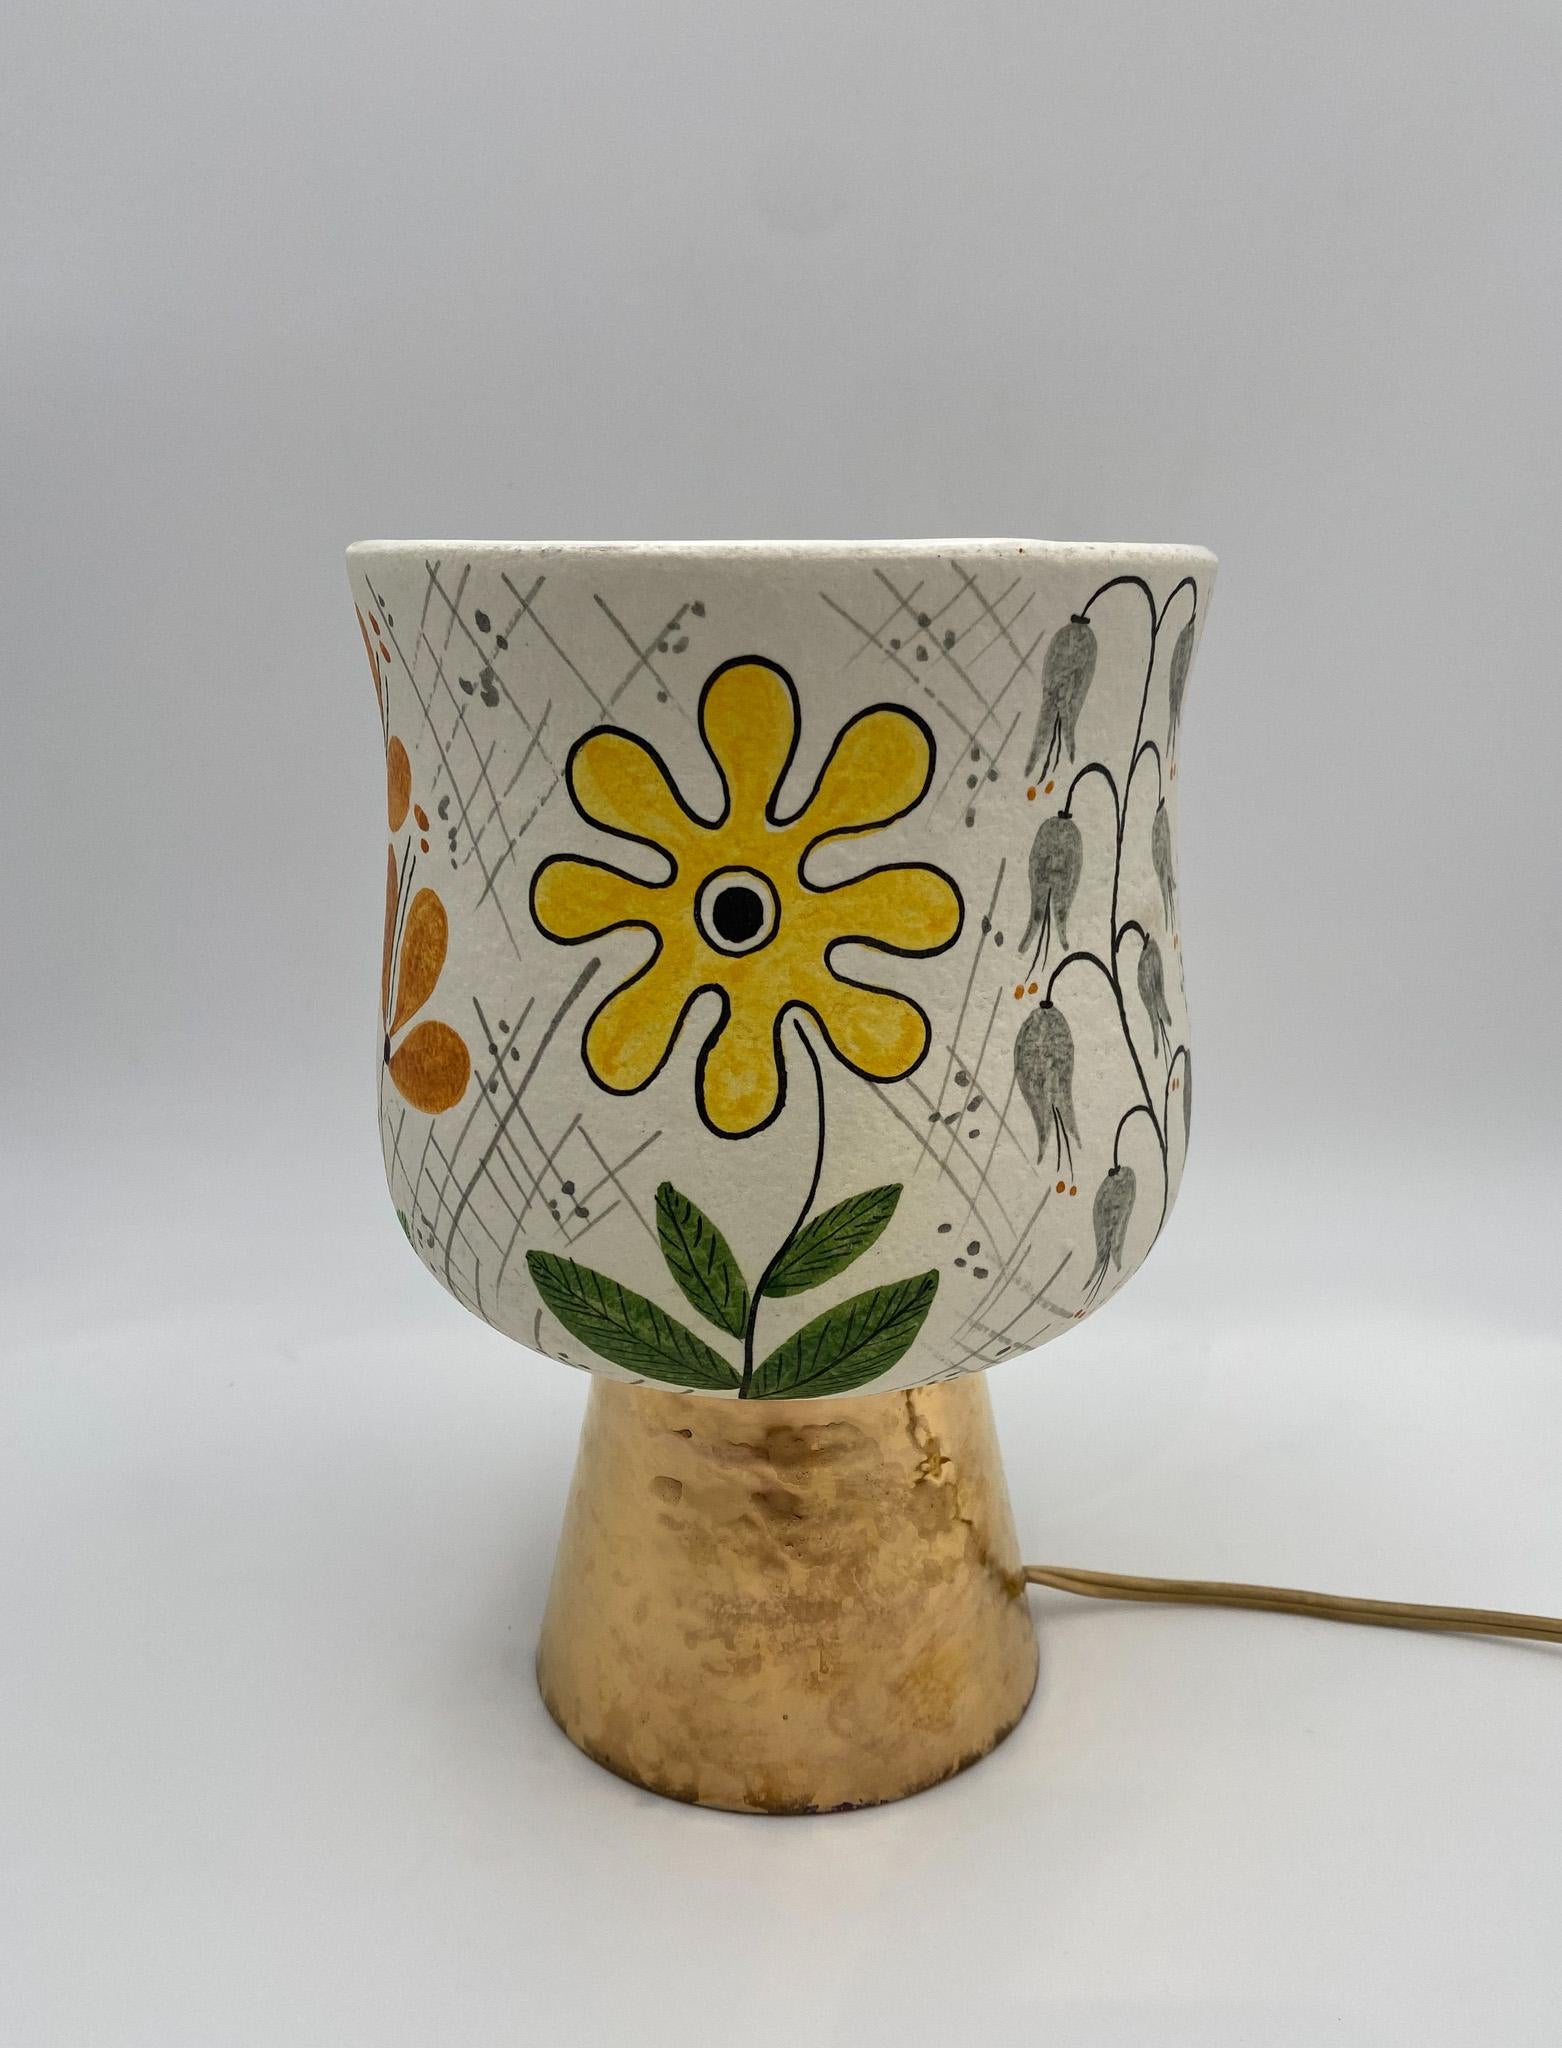 Baldelli Hand Painted Ceramic Lamp for Marbro, Italy, 1950's.